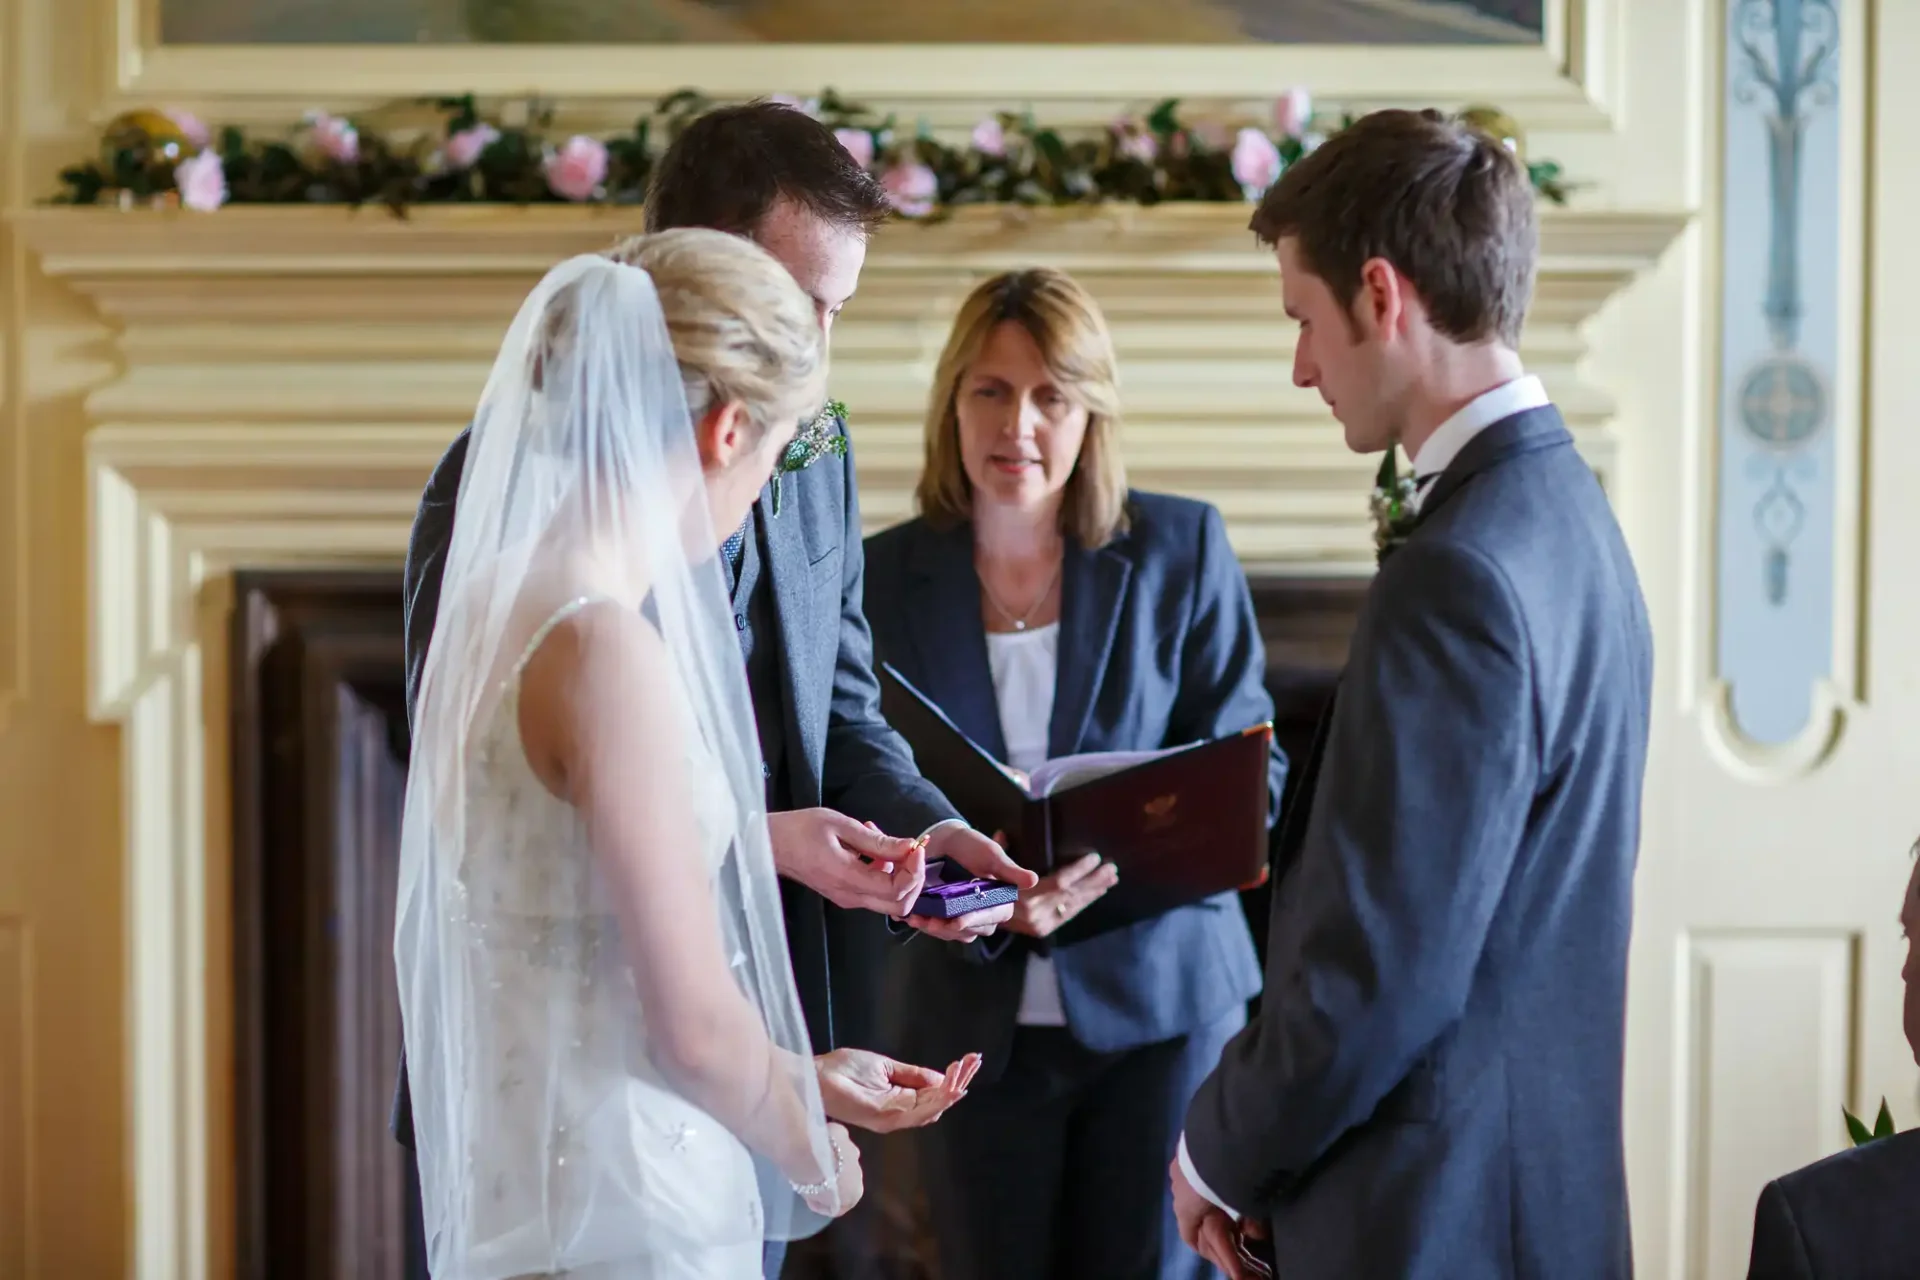 A bride and groom exchange rings during a wedding ceremony officiated by a female celebrant in an elegant room.